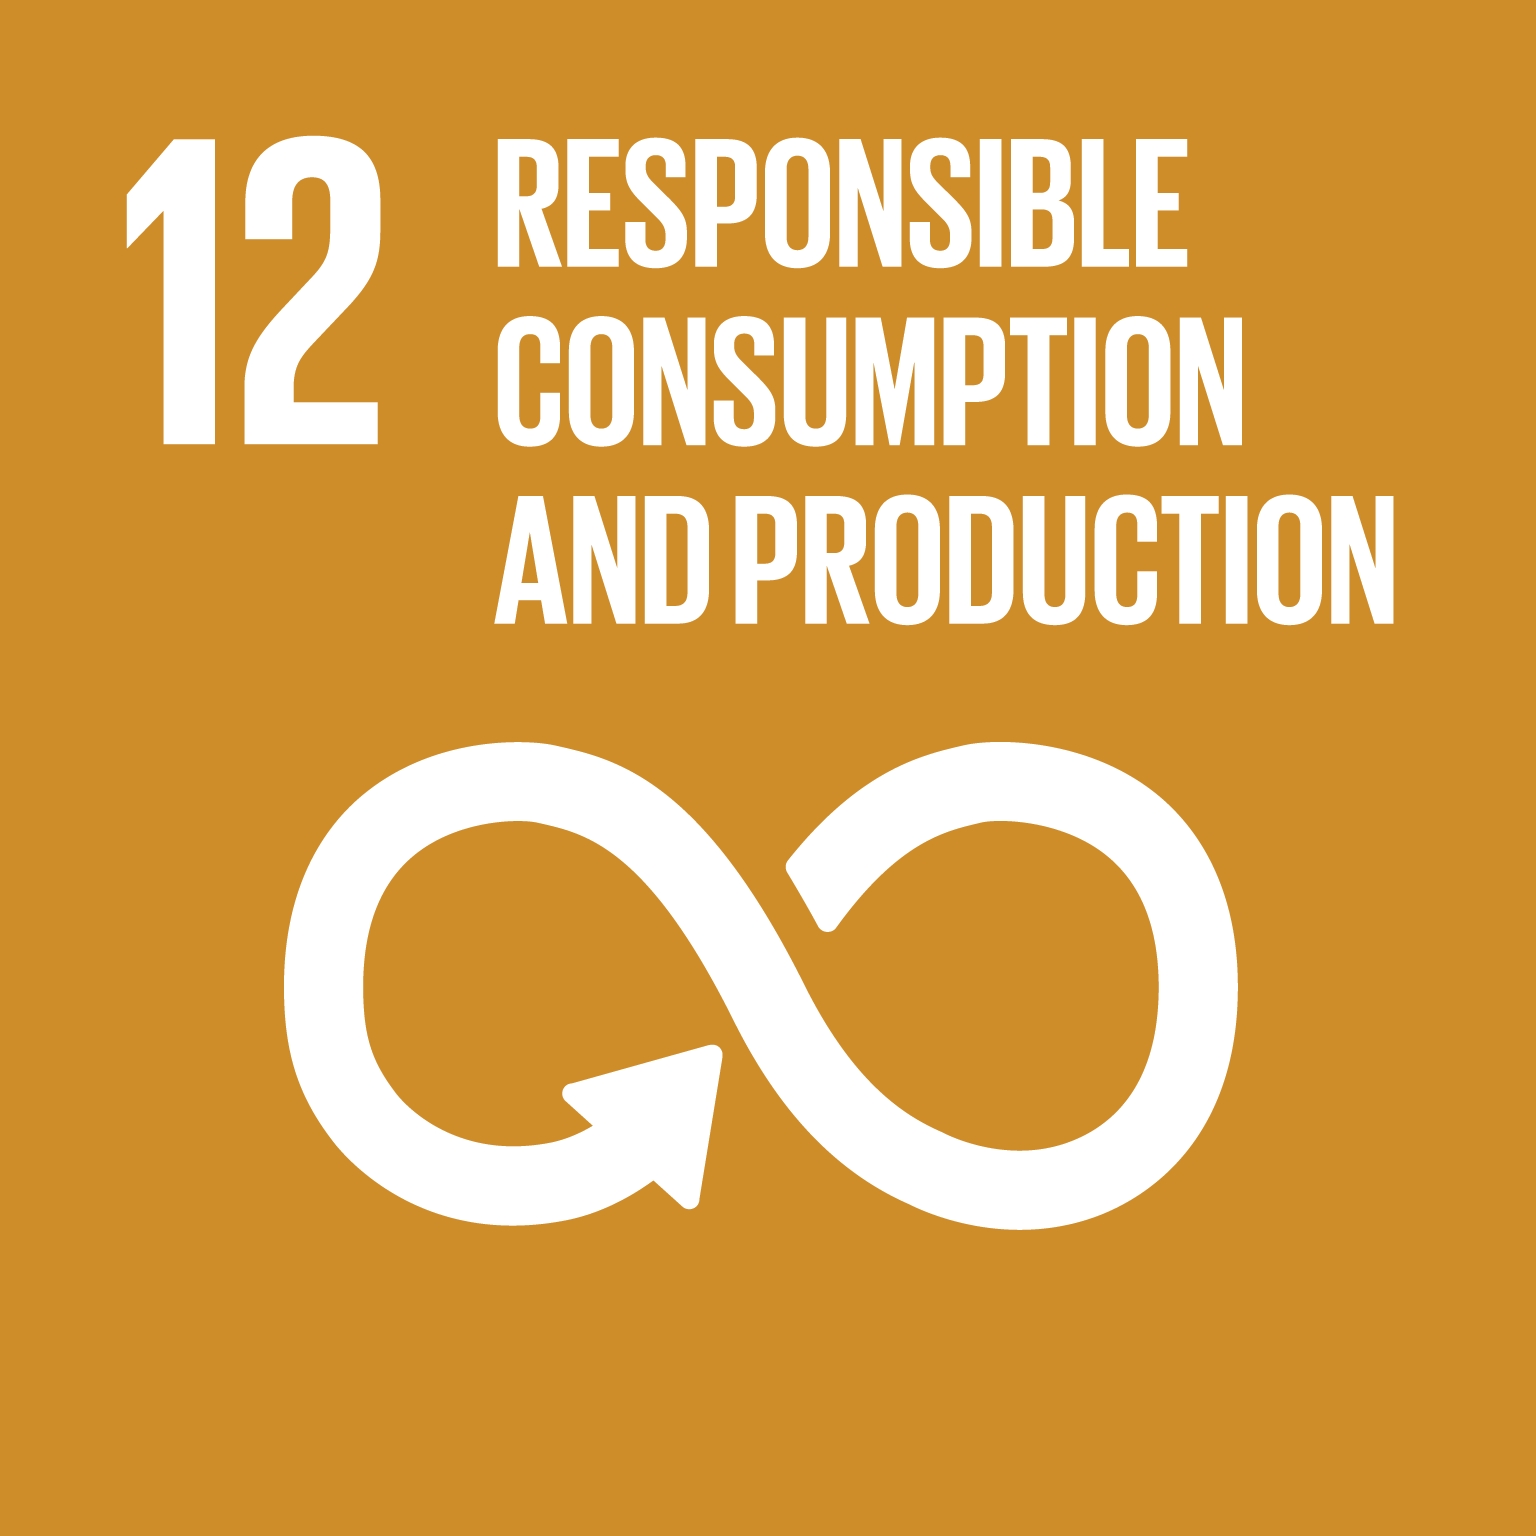 12 RESPONSBLE CONSUMPTION AND PRODUCTION